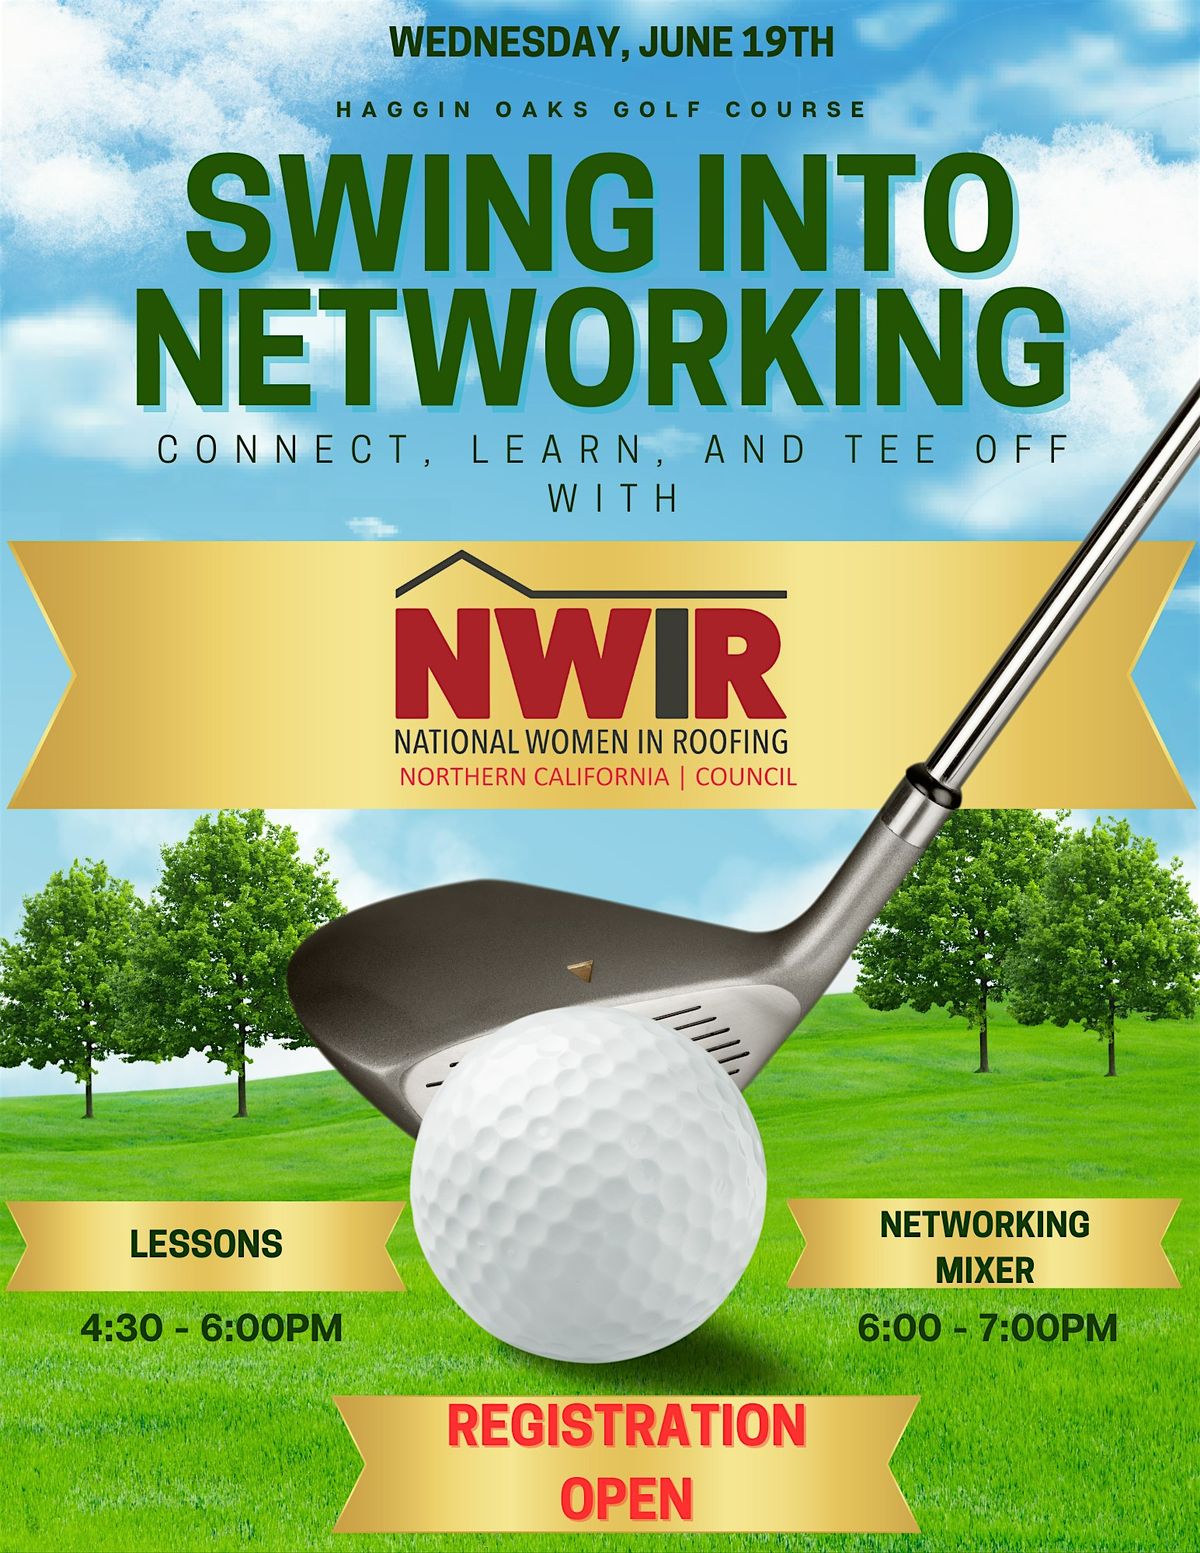 National Women in Roofing|Northern California - Golf Lessons and Mixer